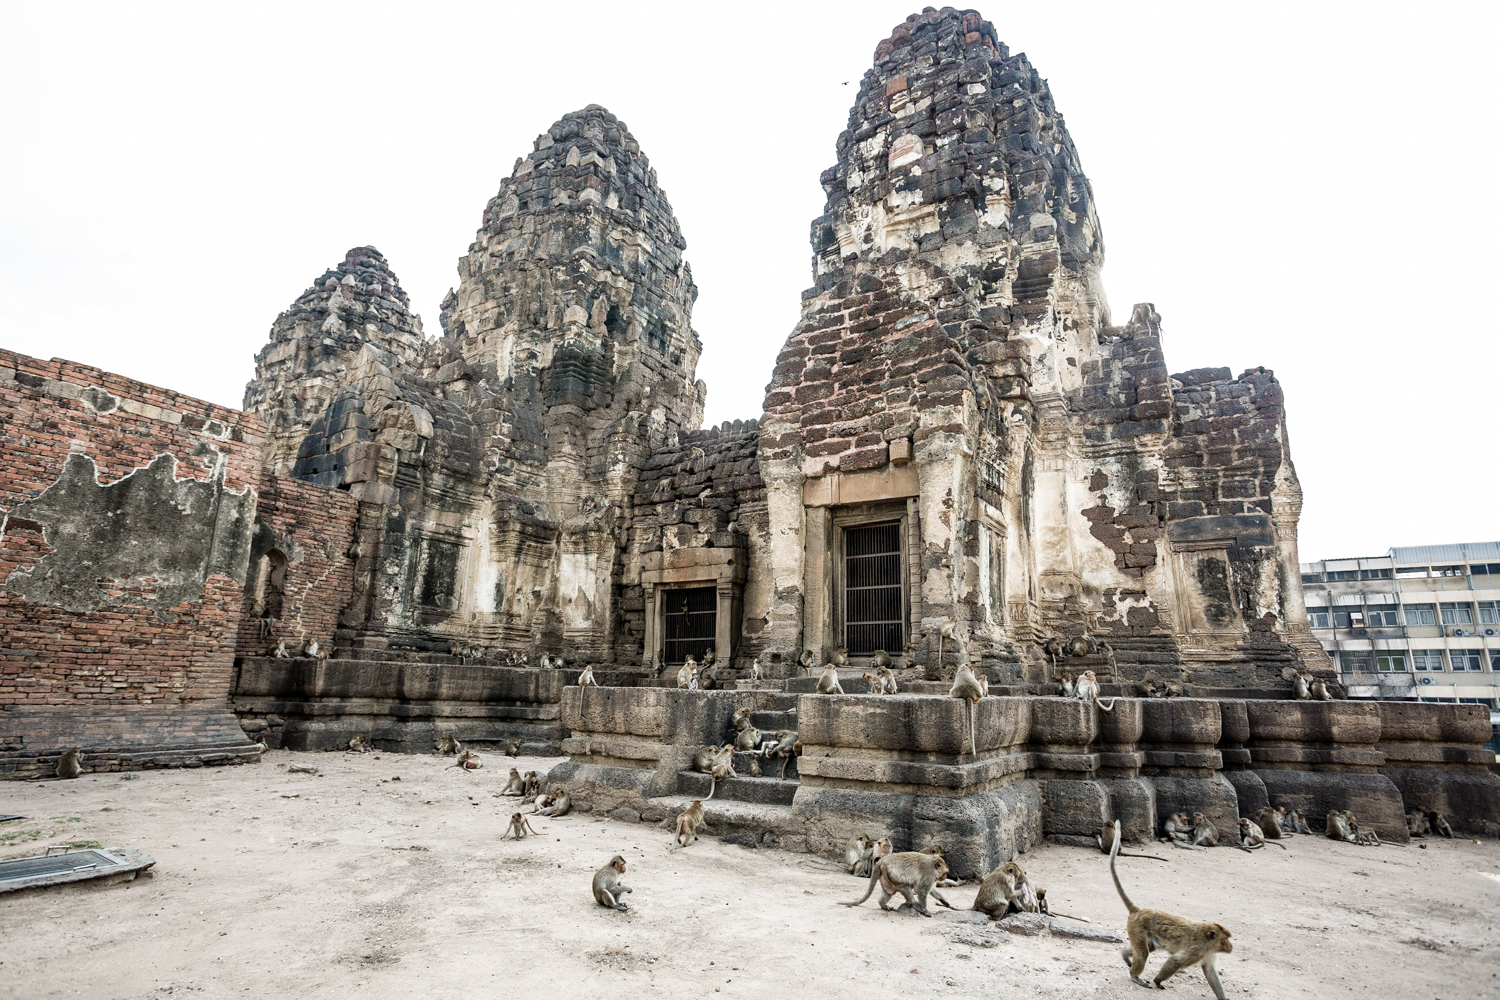  The Prang Sam Yot Temple is home to a resident troop of hundreds of monkeys.&nbsp; 